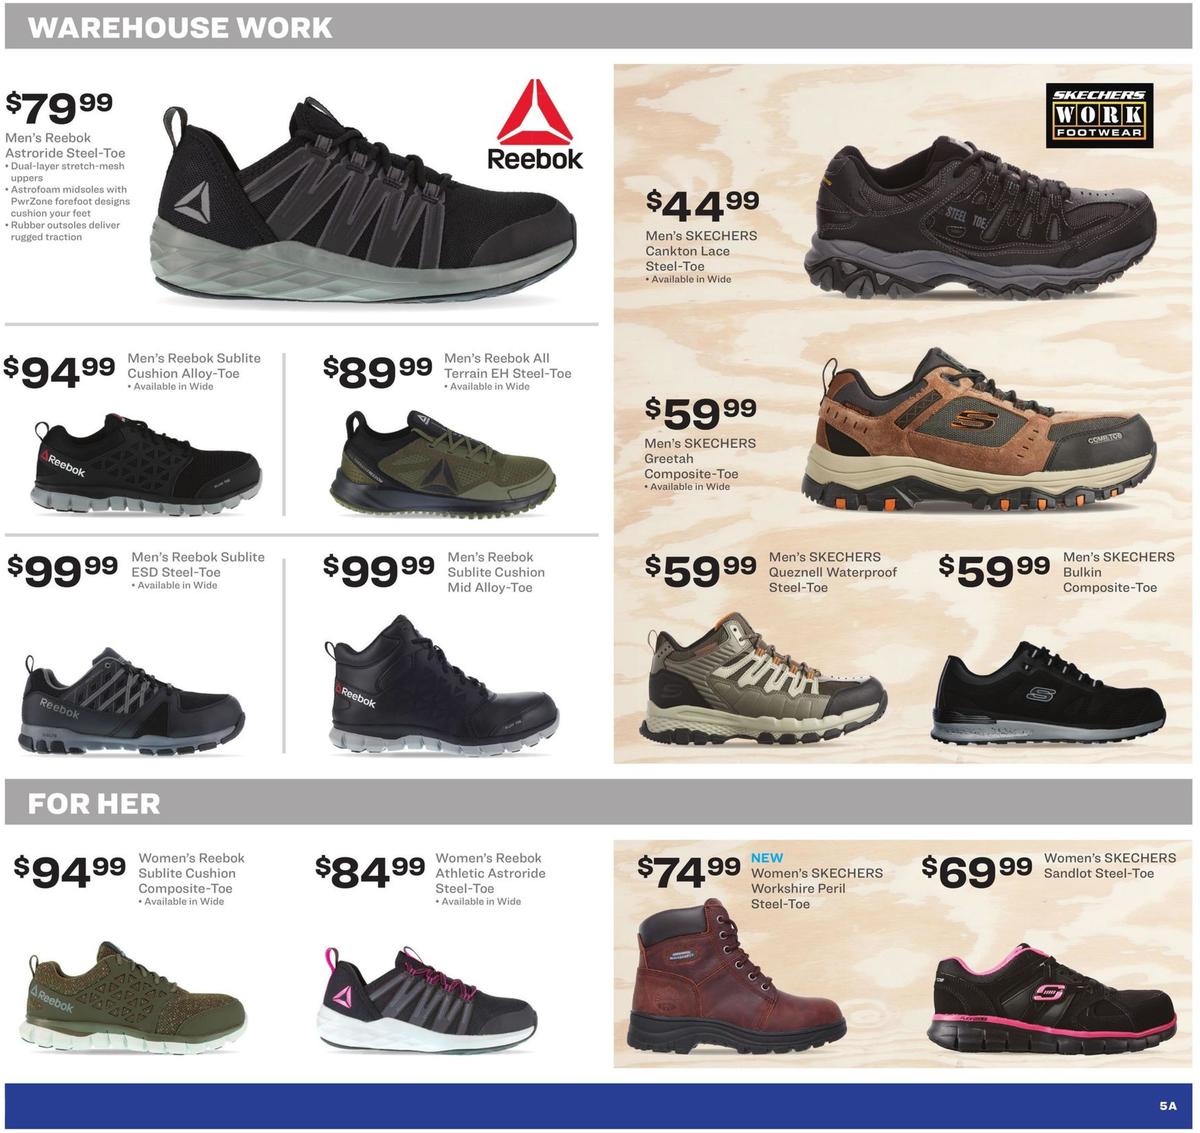 Academy Sports + Outdoors Fall 2019 Workwear Lookbook Weekly Ad from September 4